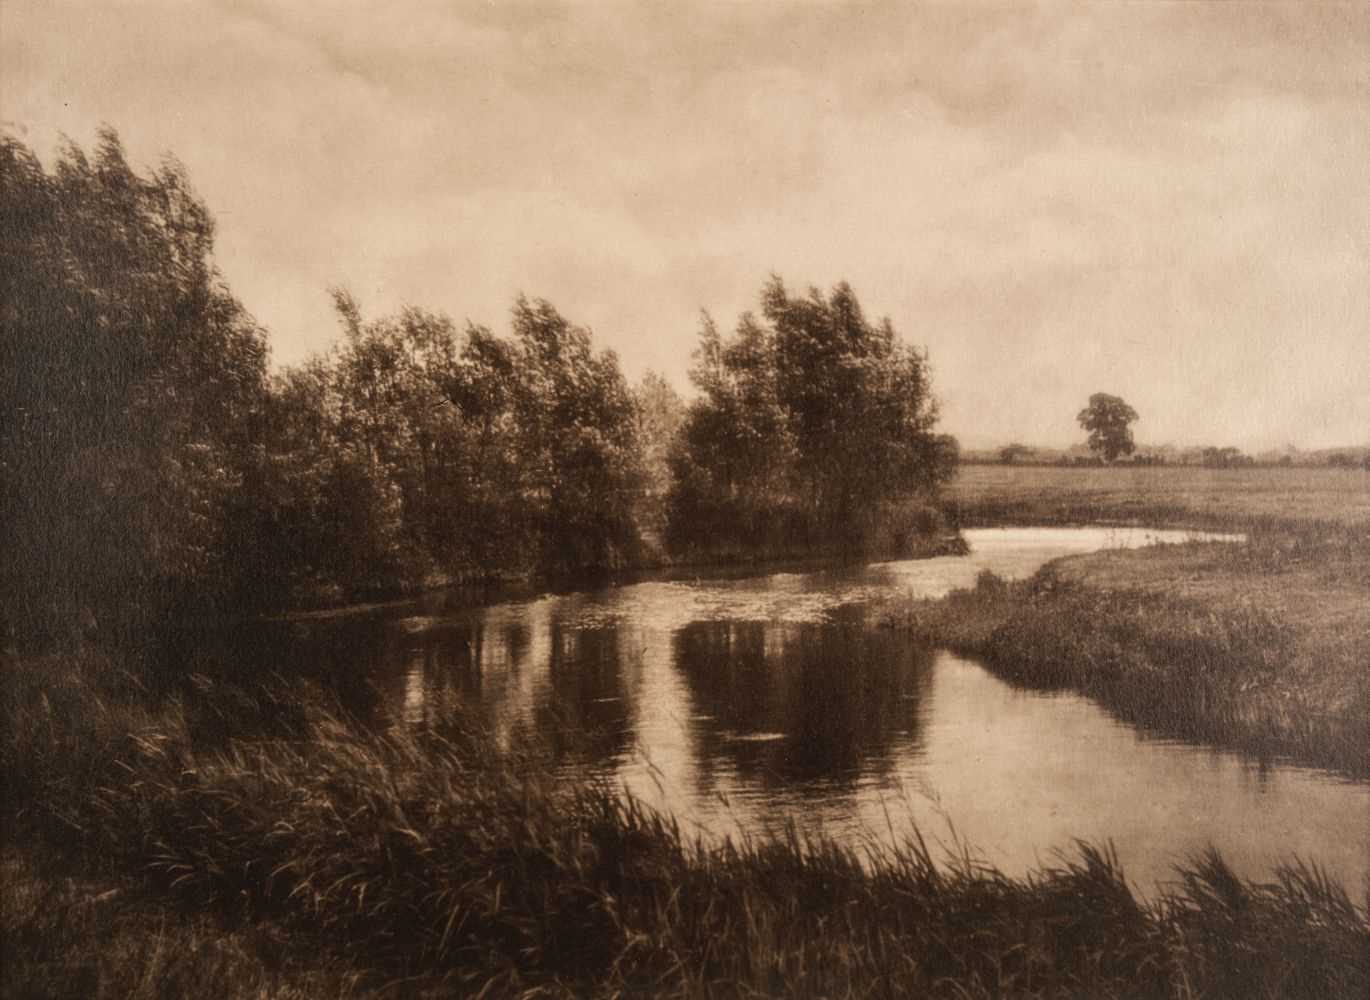 Lot 538 - Job (Charles, 1858-1930). On the Arun and another similar river scene, c. 1920